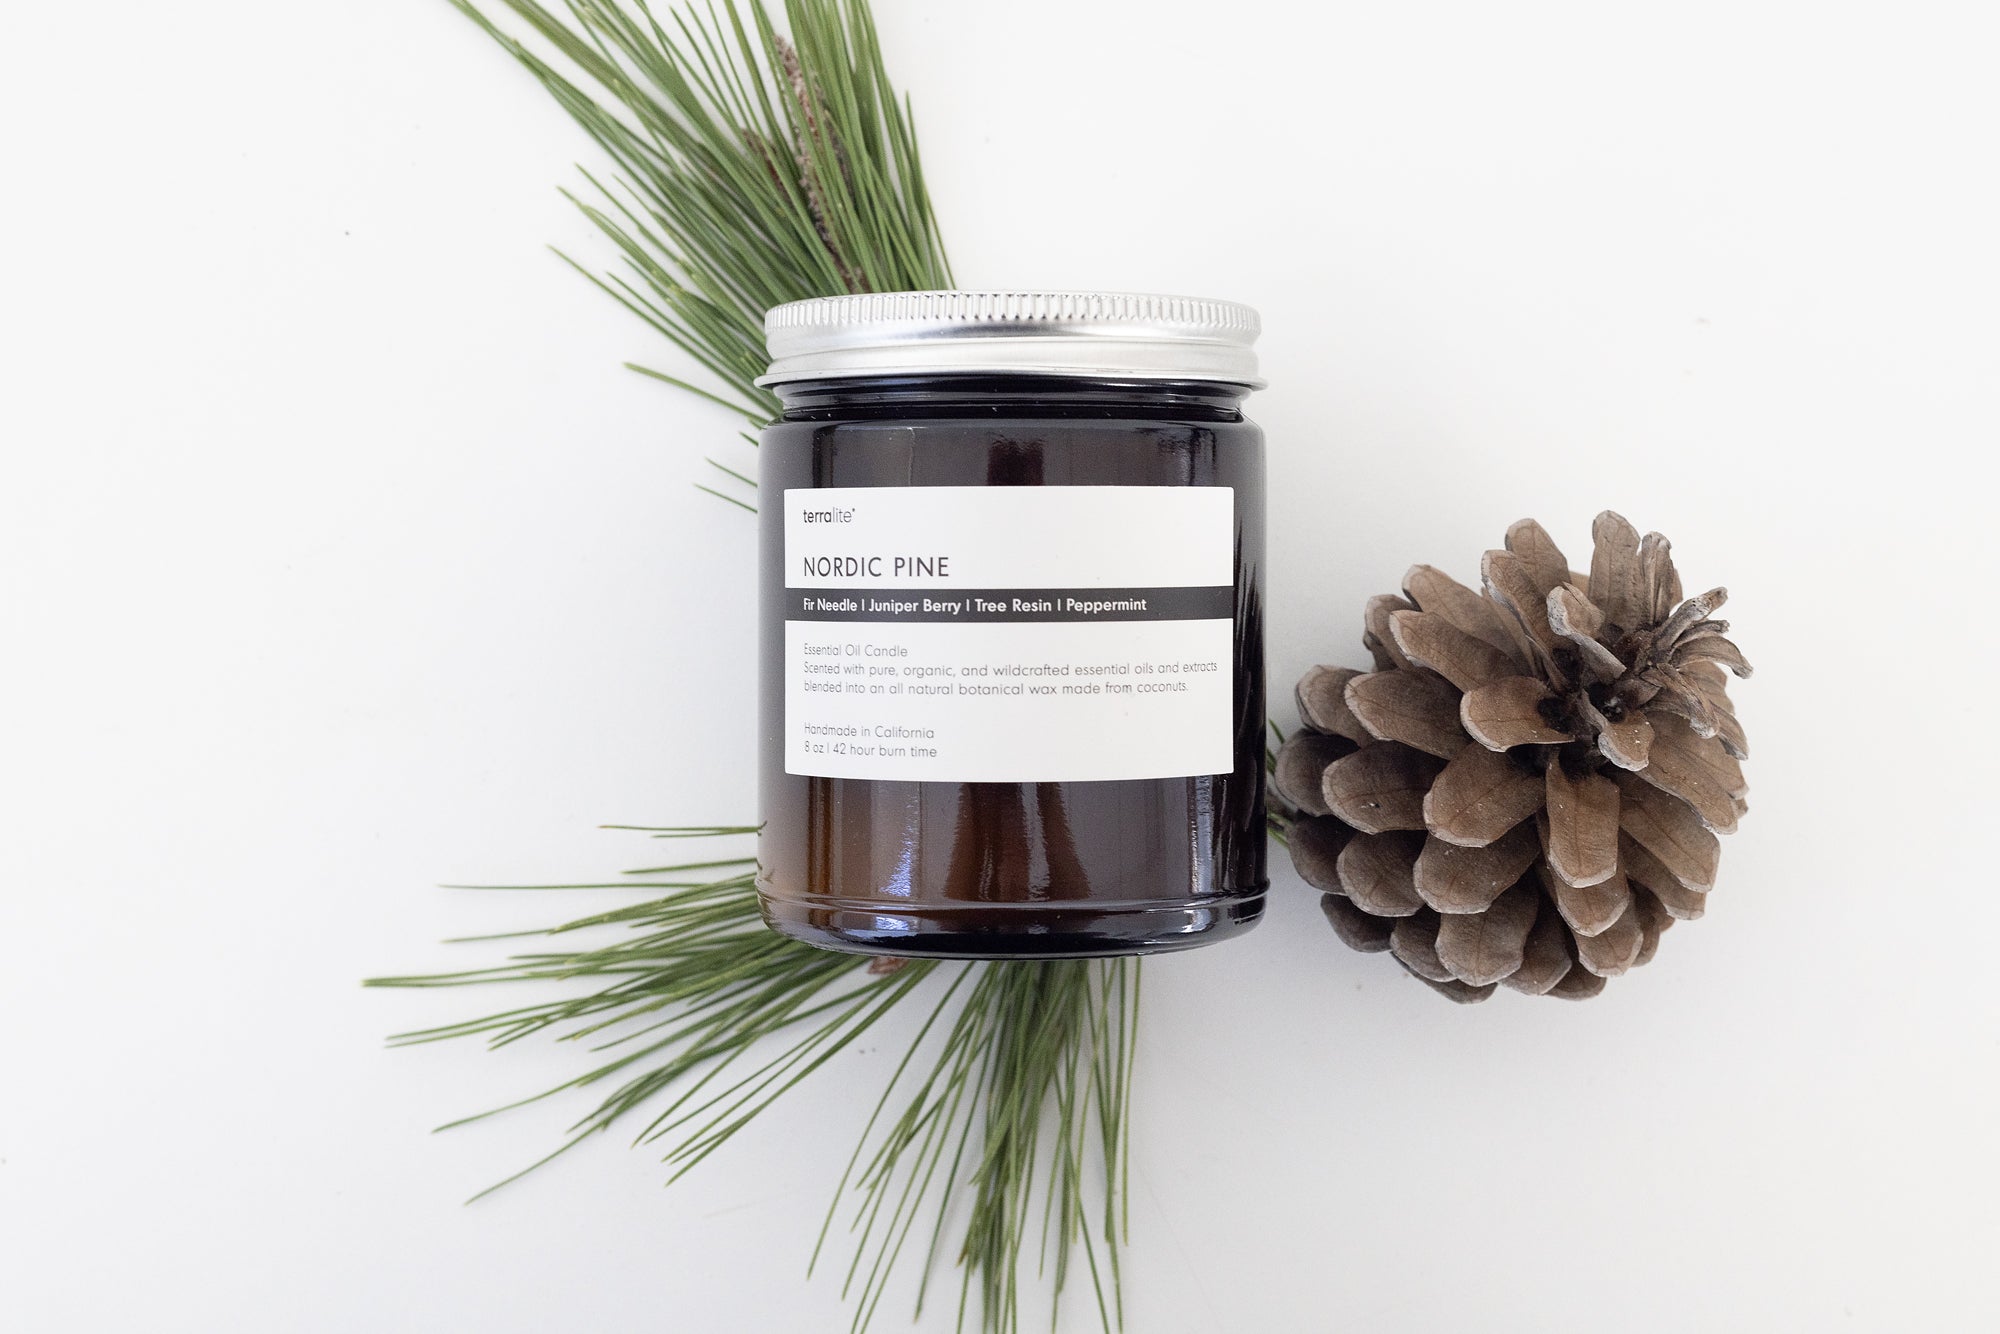 Nordic Pine Essential Oil Candle - 8 oz. made with Fir Needle, Juniper Berry, Tree Resin, and Organic Peppermint.